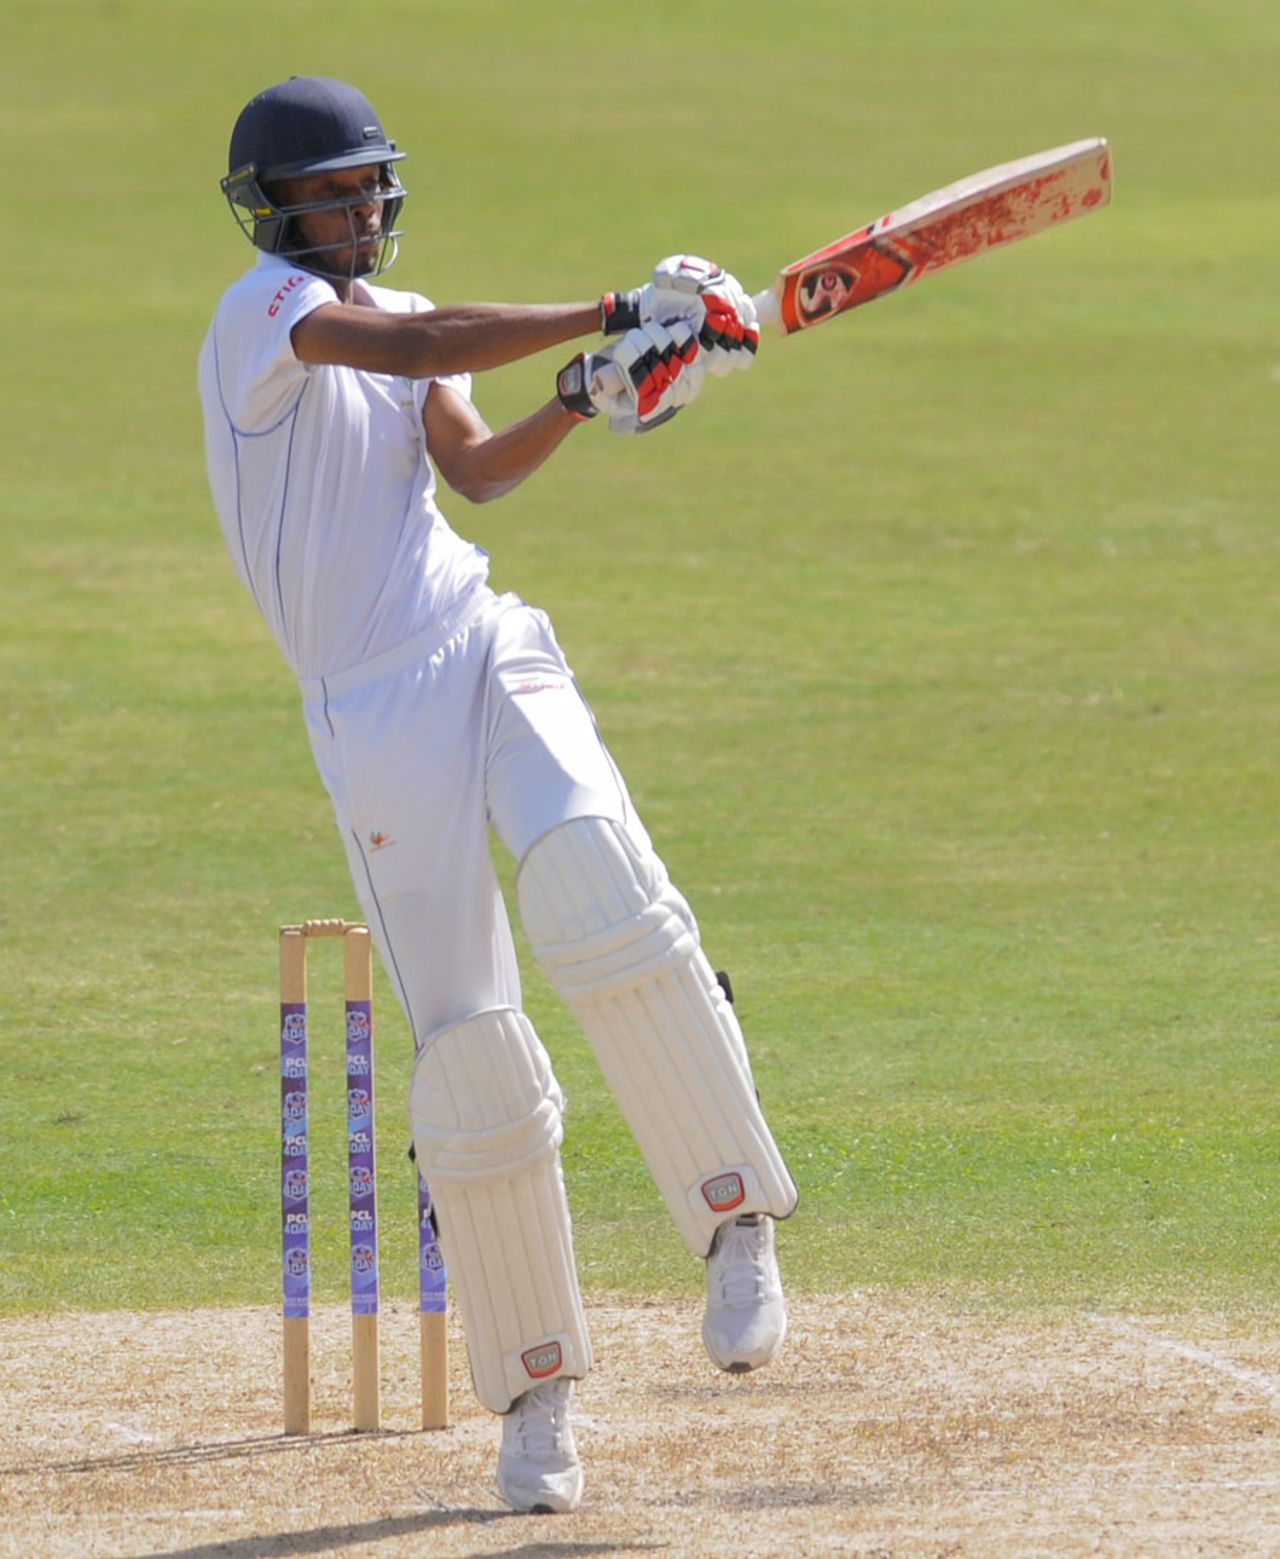 Roston Chase pulls during his unbeaten 95, Barbados v Leeward Islands, 1st day, WICB Regional 4 Day Tournament, Barbados, December 11, 2015